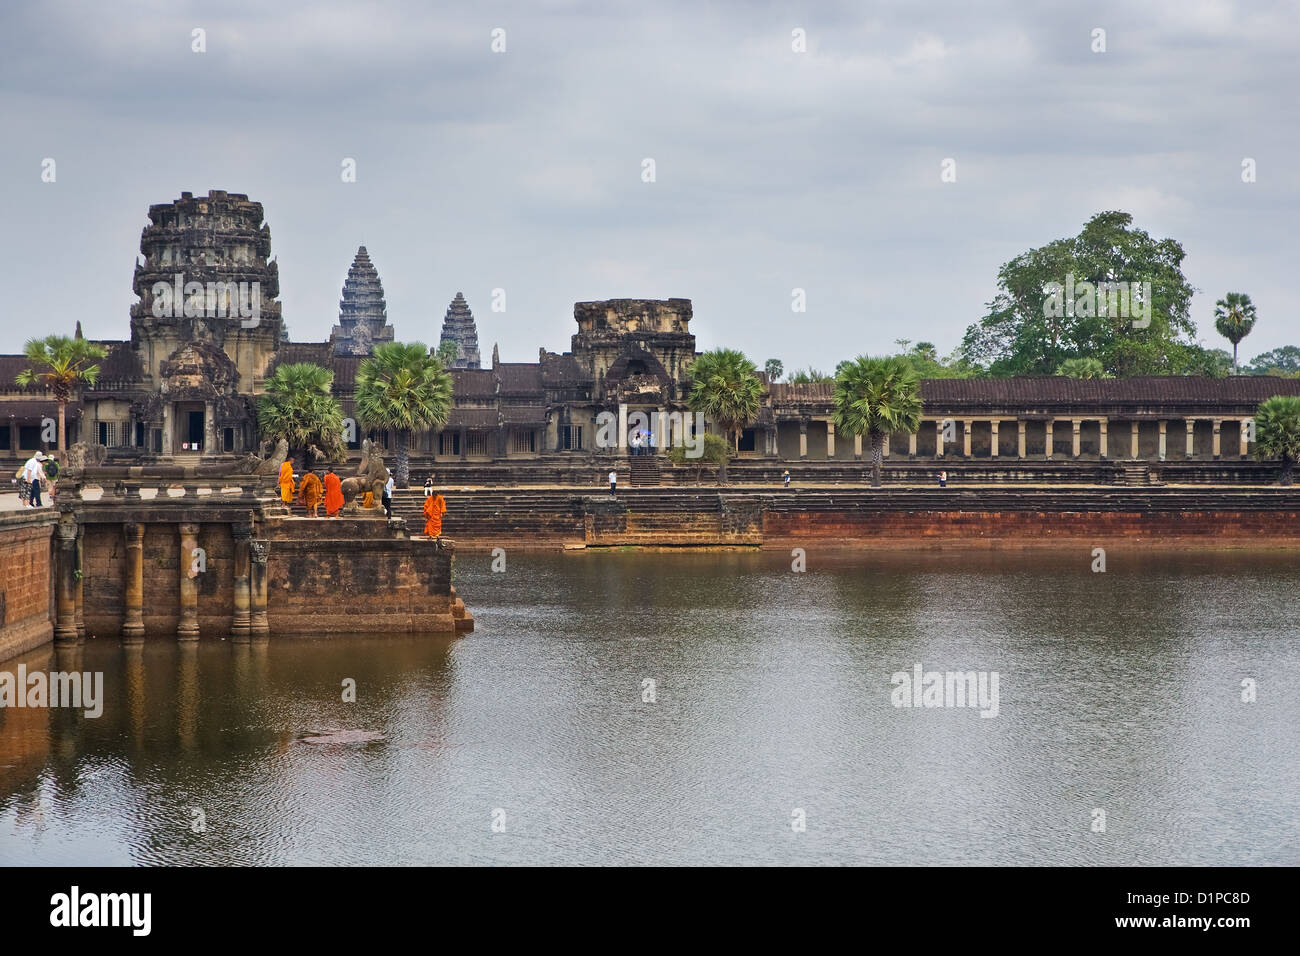 Monks at the temple of Angkor Wat, Cambodia Stock Photo